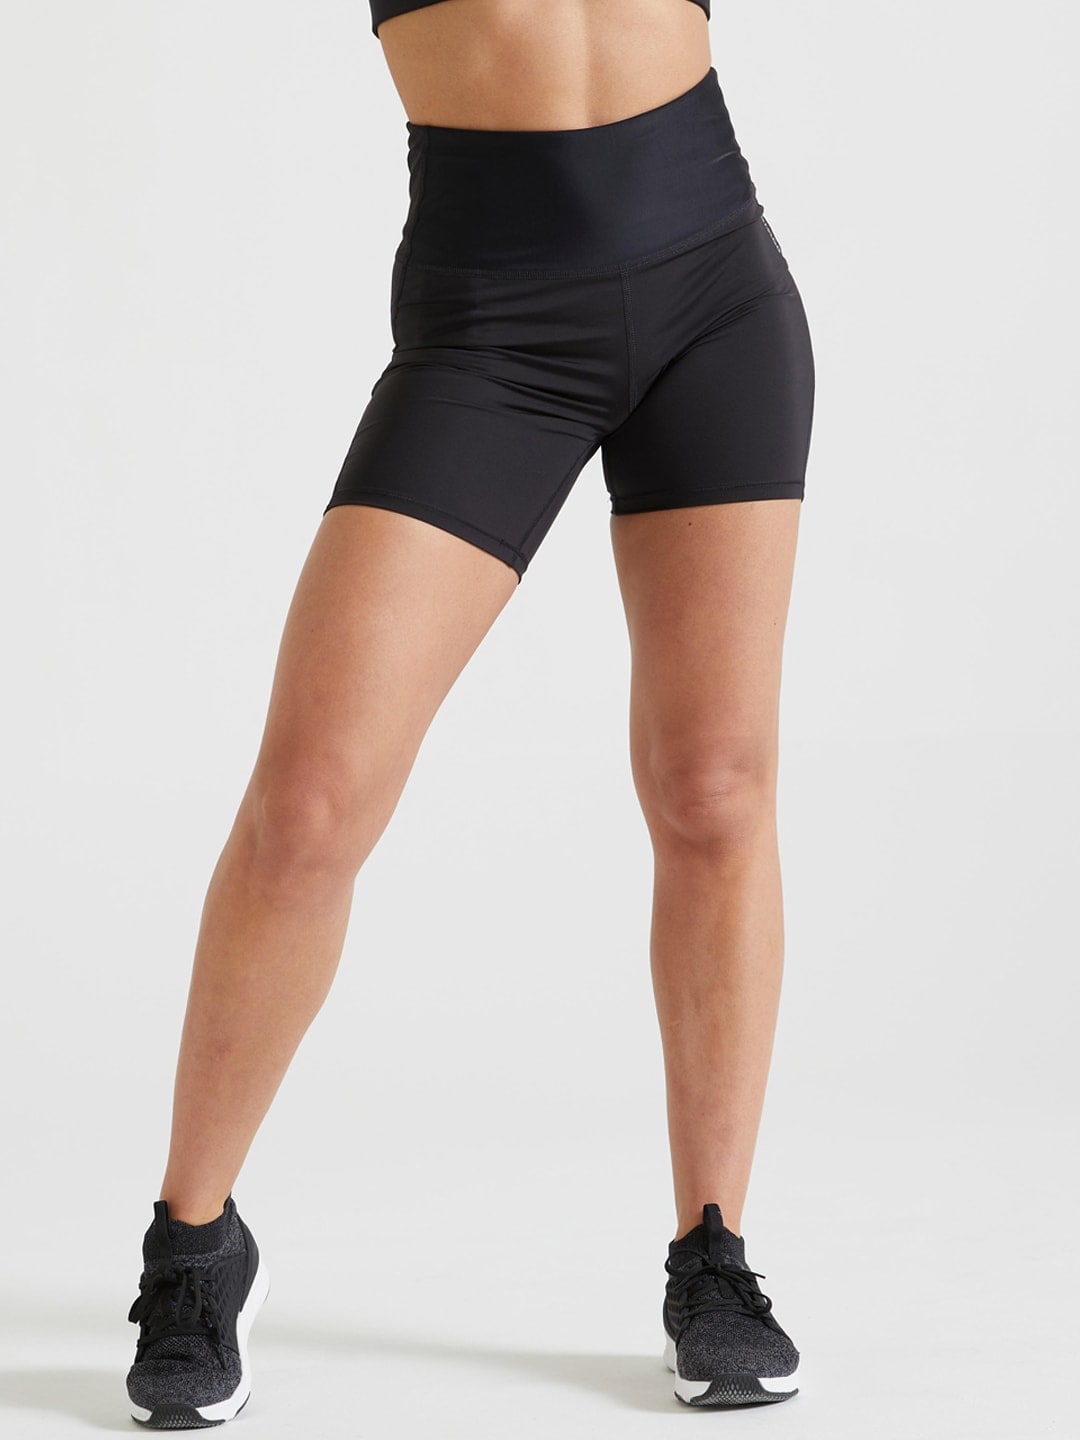 Domyos by Decathlon Women Black High Waist Skin-Tight Fitness Shorts Price in India